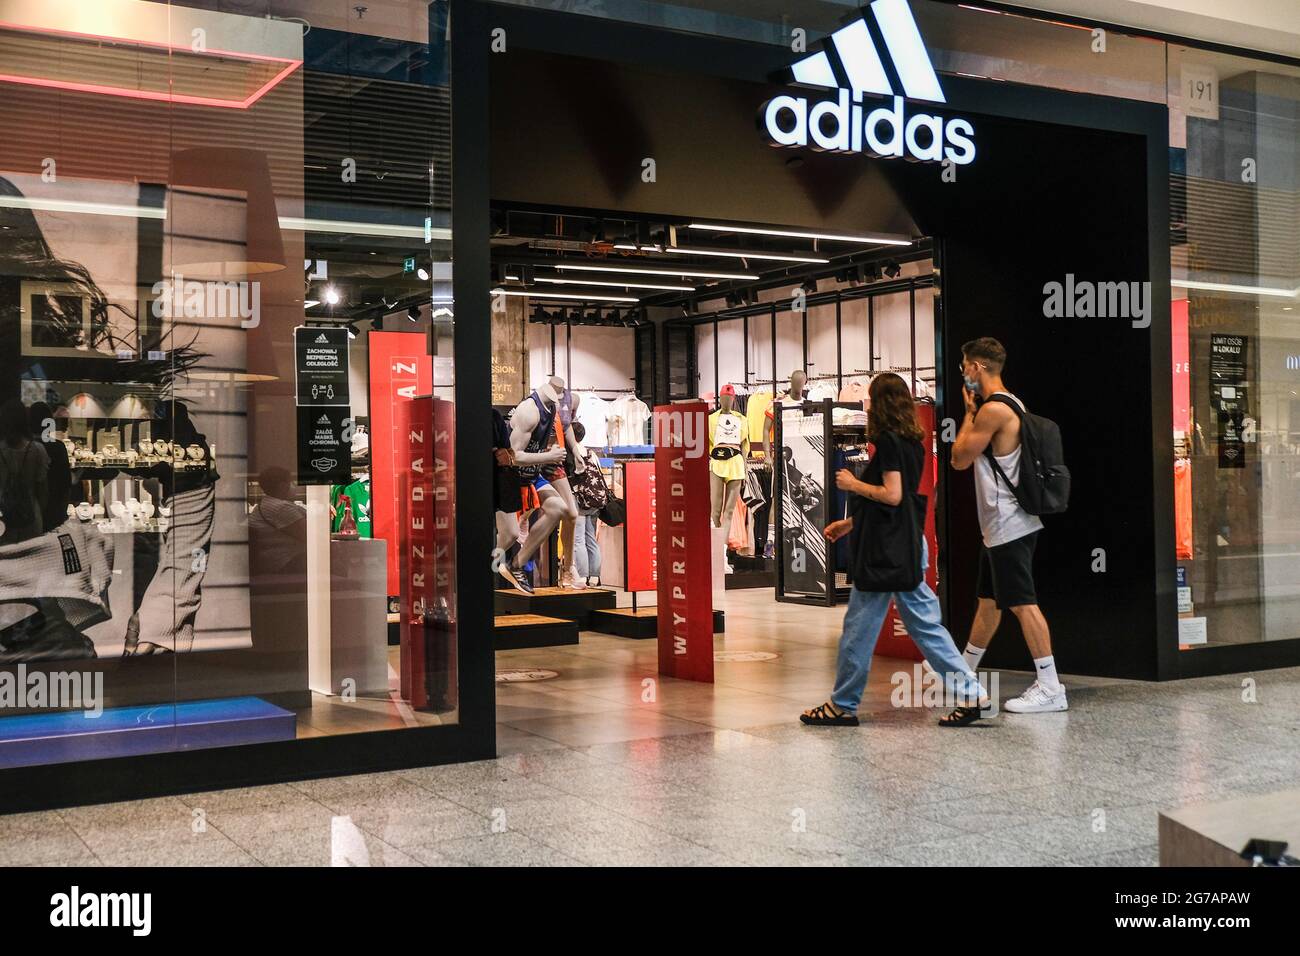 Adidas Shop High Resolution Stock Photography and Images - Alamy